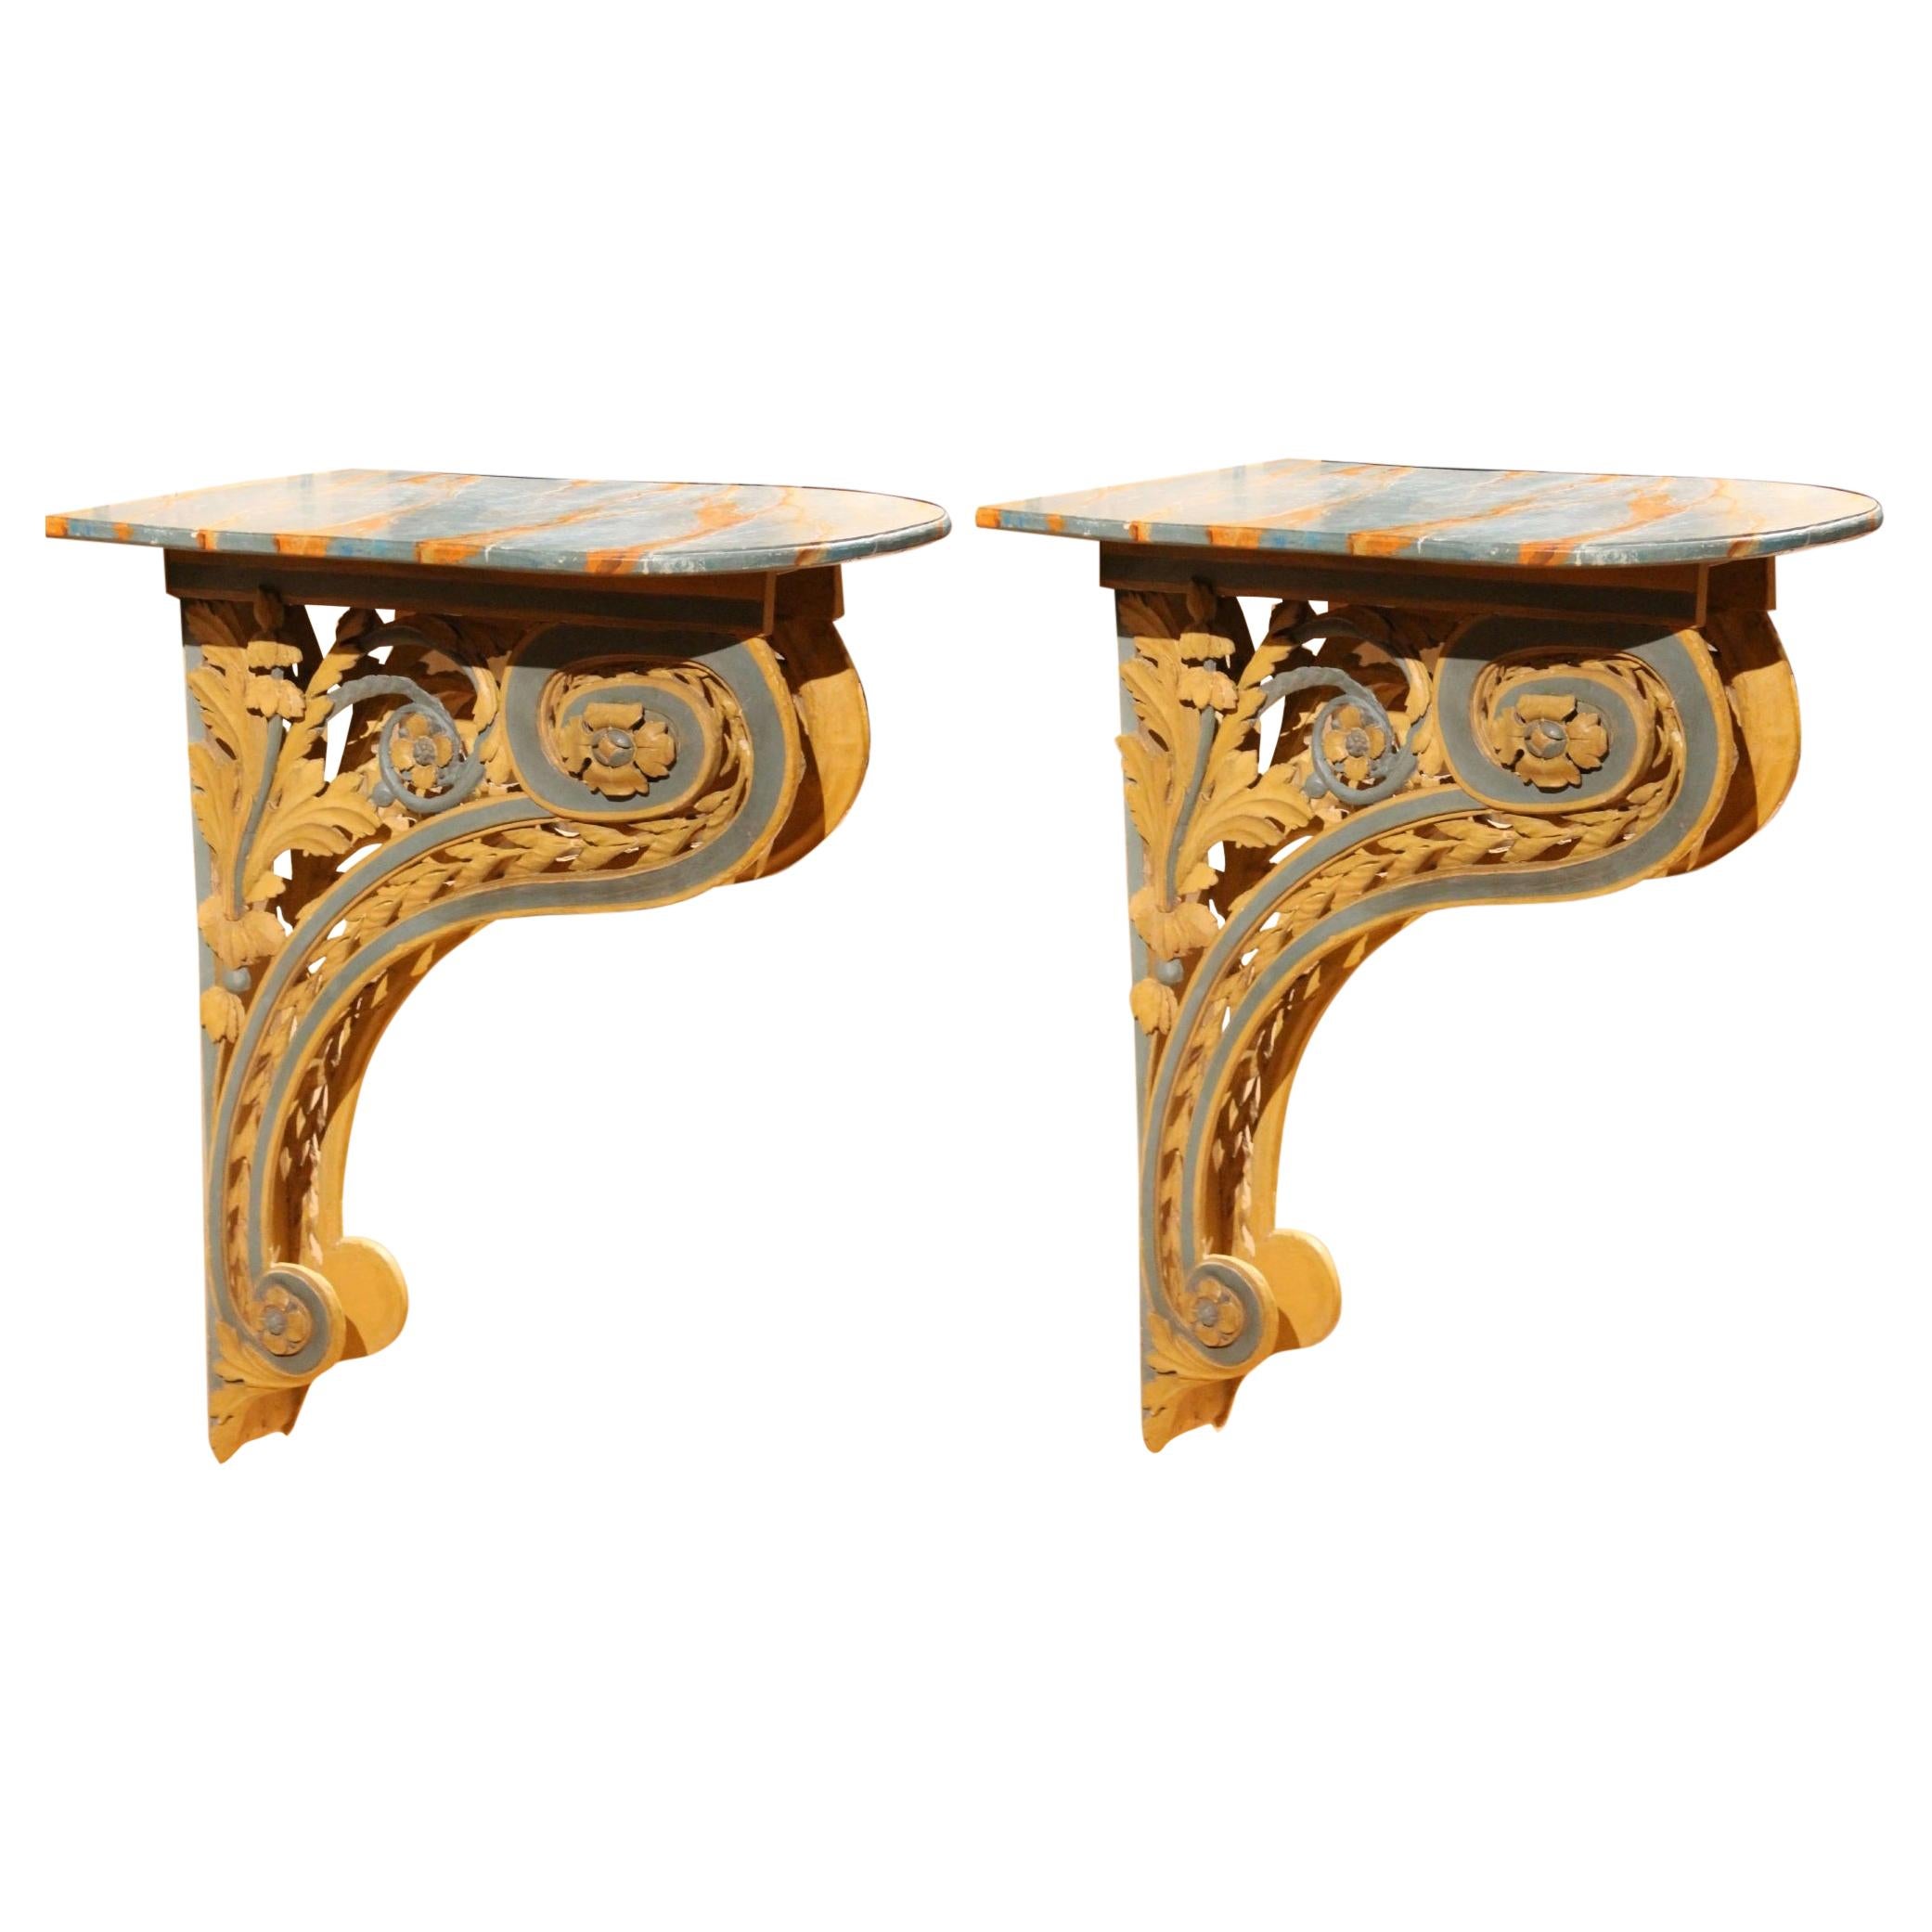 Italian 18th Century Louis XVI Carved and Lacquer Wall Mounted Console Tables For Sale